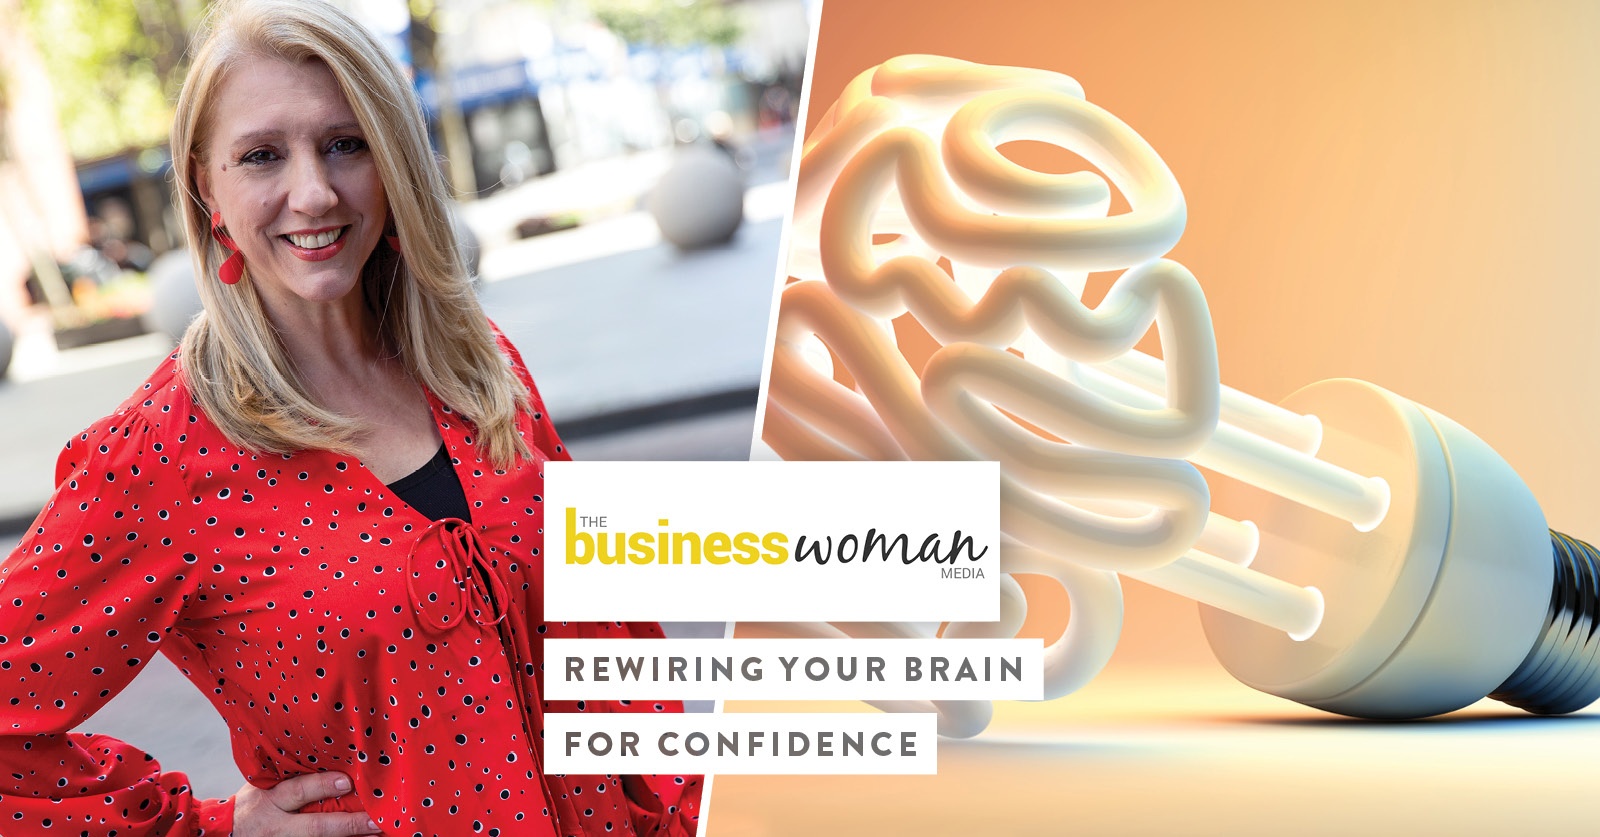 business-woman-media-rewiring-your-brain-for-confidence